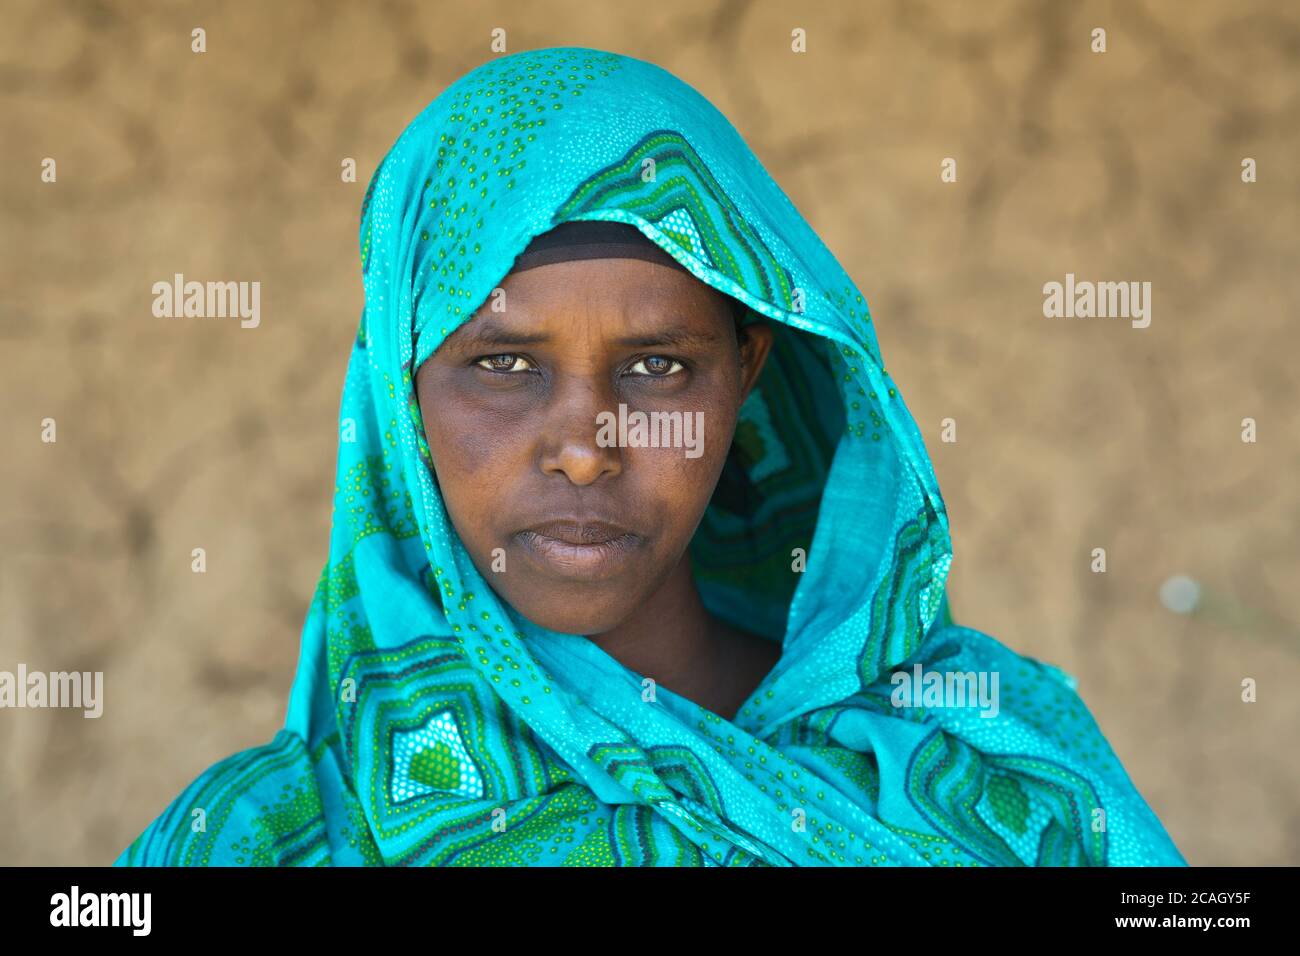 12.11.2019, Hobyo Kebele, Somali Region, Ethiopia - Portrait of a participant of the microfinance project OWDA (Organisation for Welfare and Developme Stock Photo